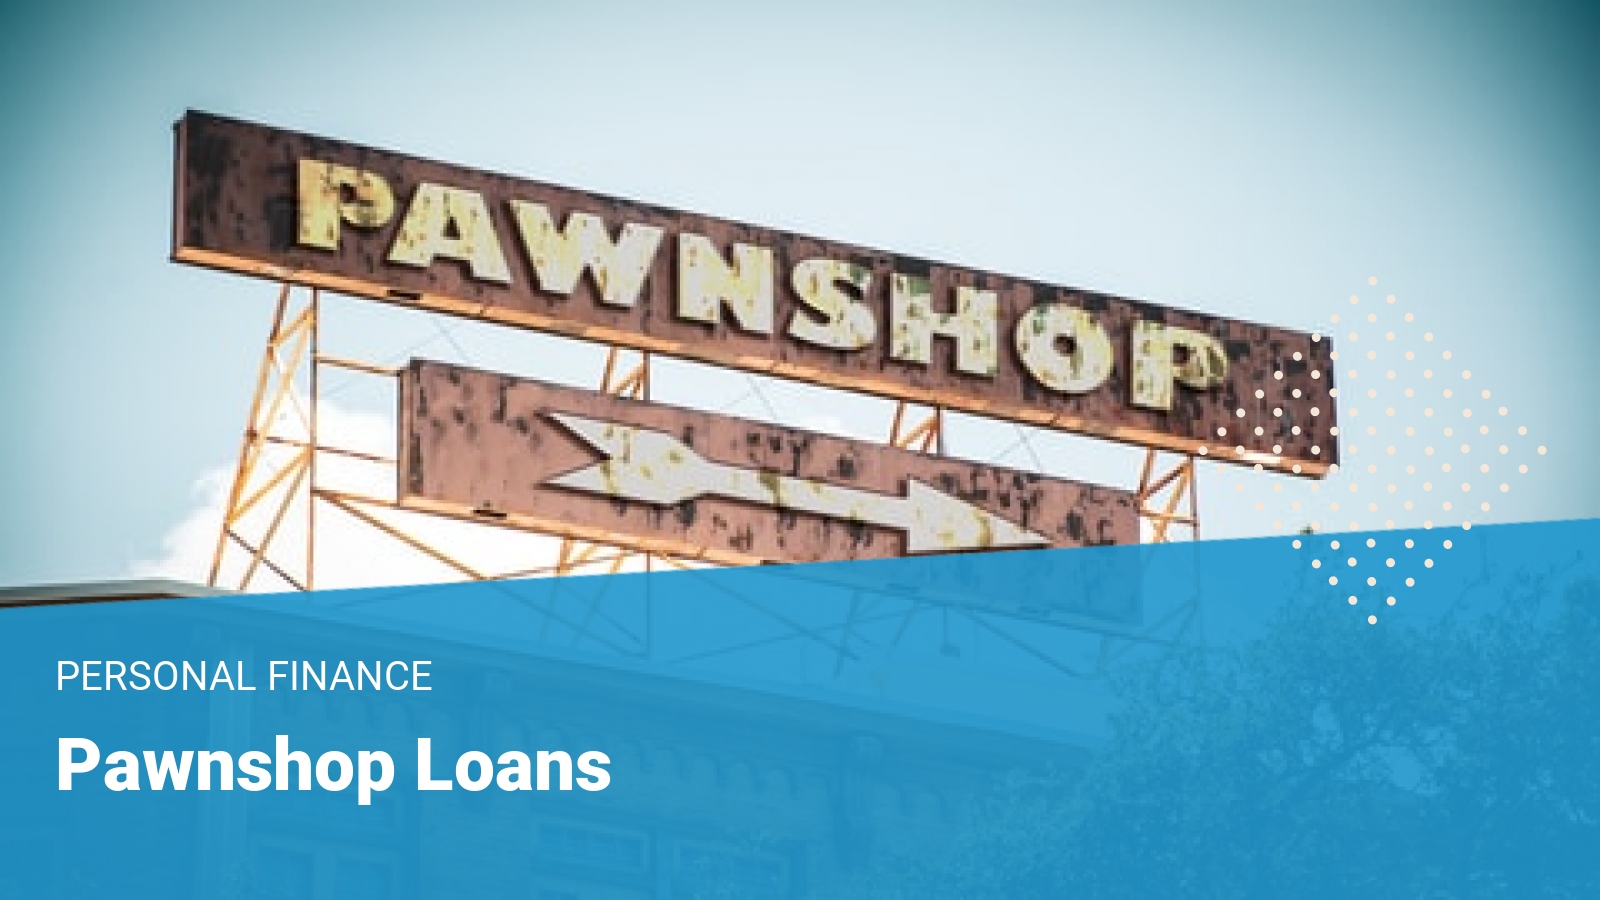 Terms Pawn shop and Pawnshop are semantically related or have